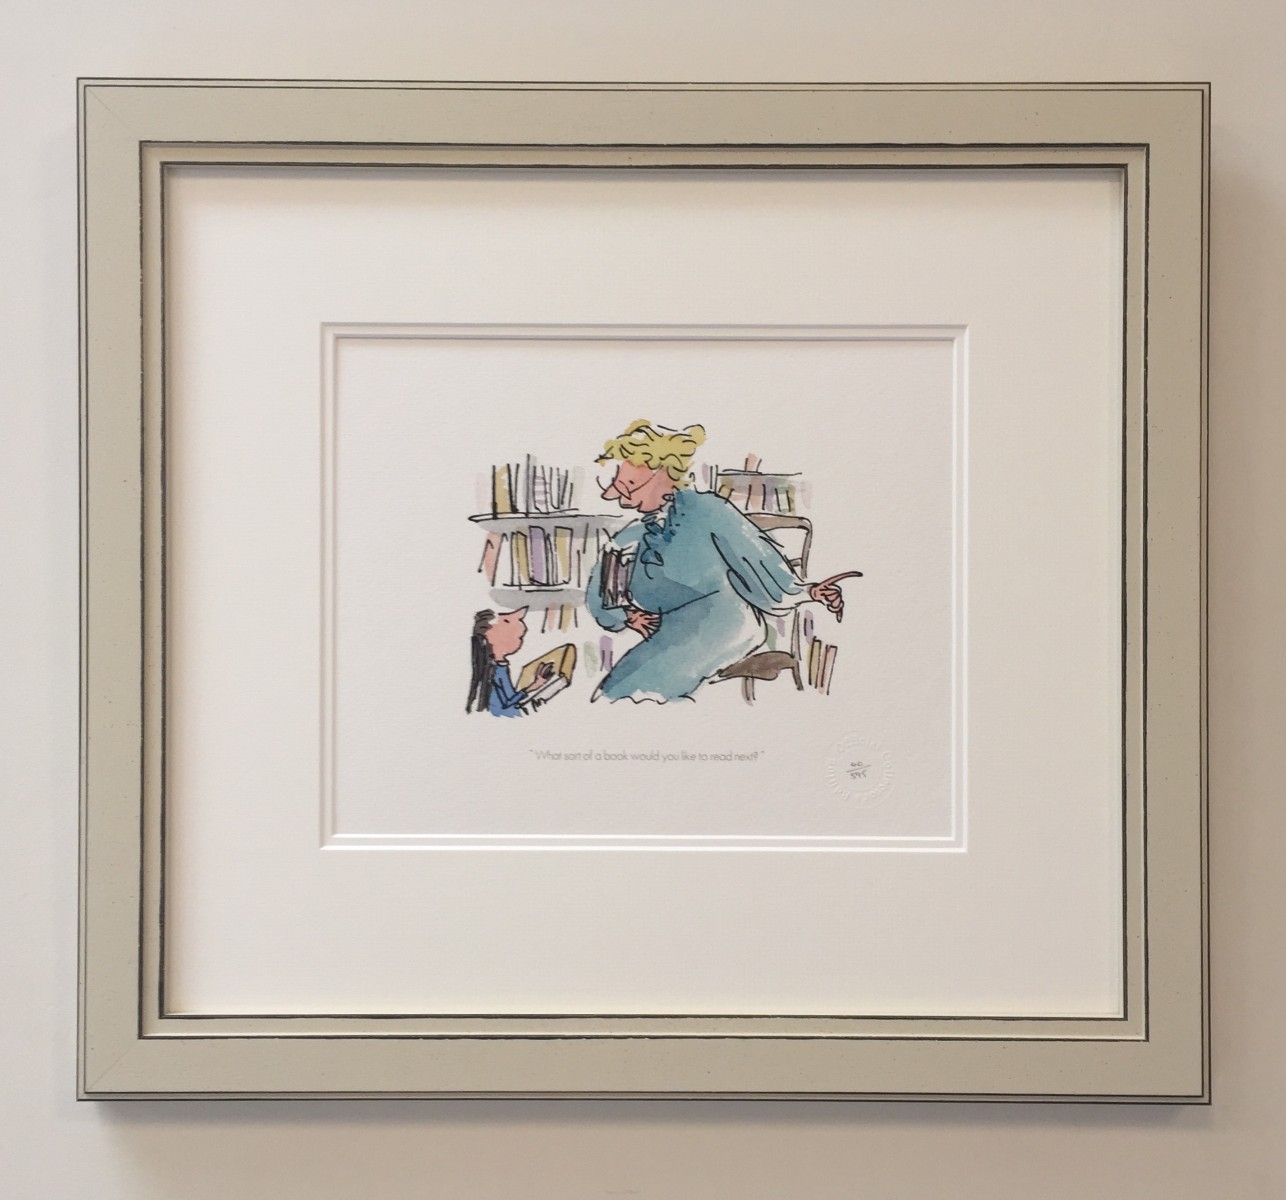 What sort of book would you like to read? by Quentin Blake